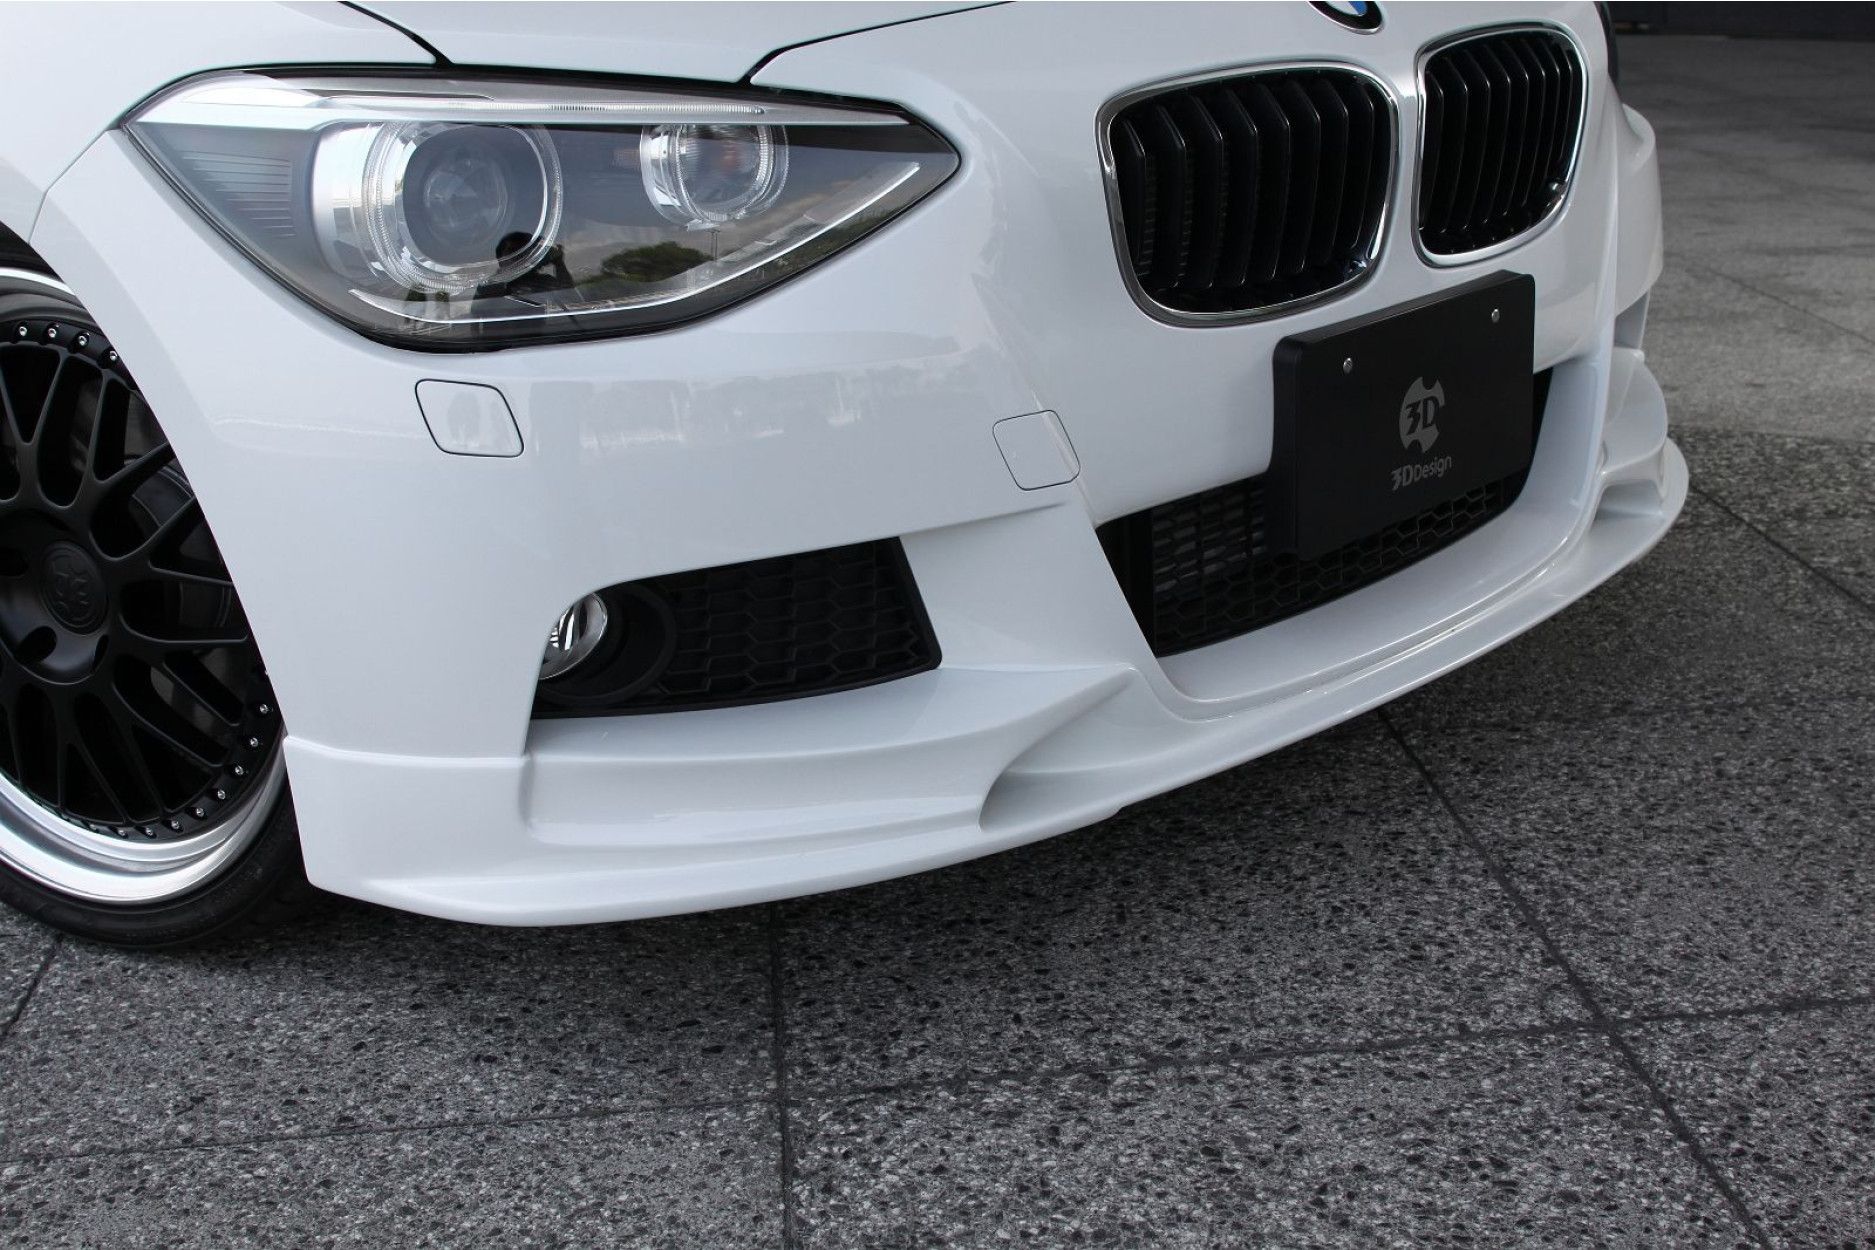 3Ddesign roof spoiler for BMW 1 Series F20 - buy online at CFD